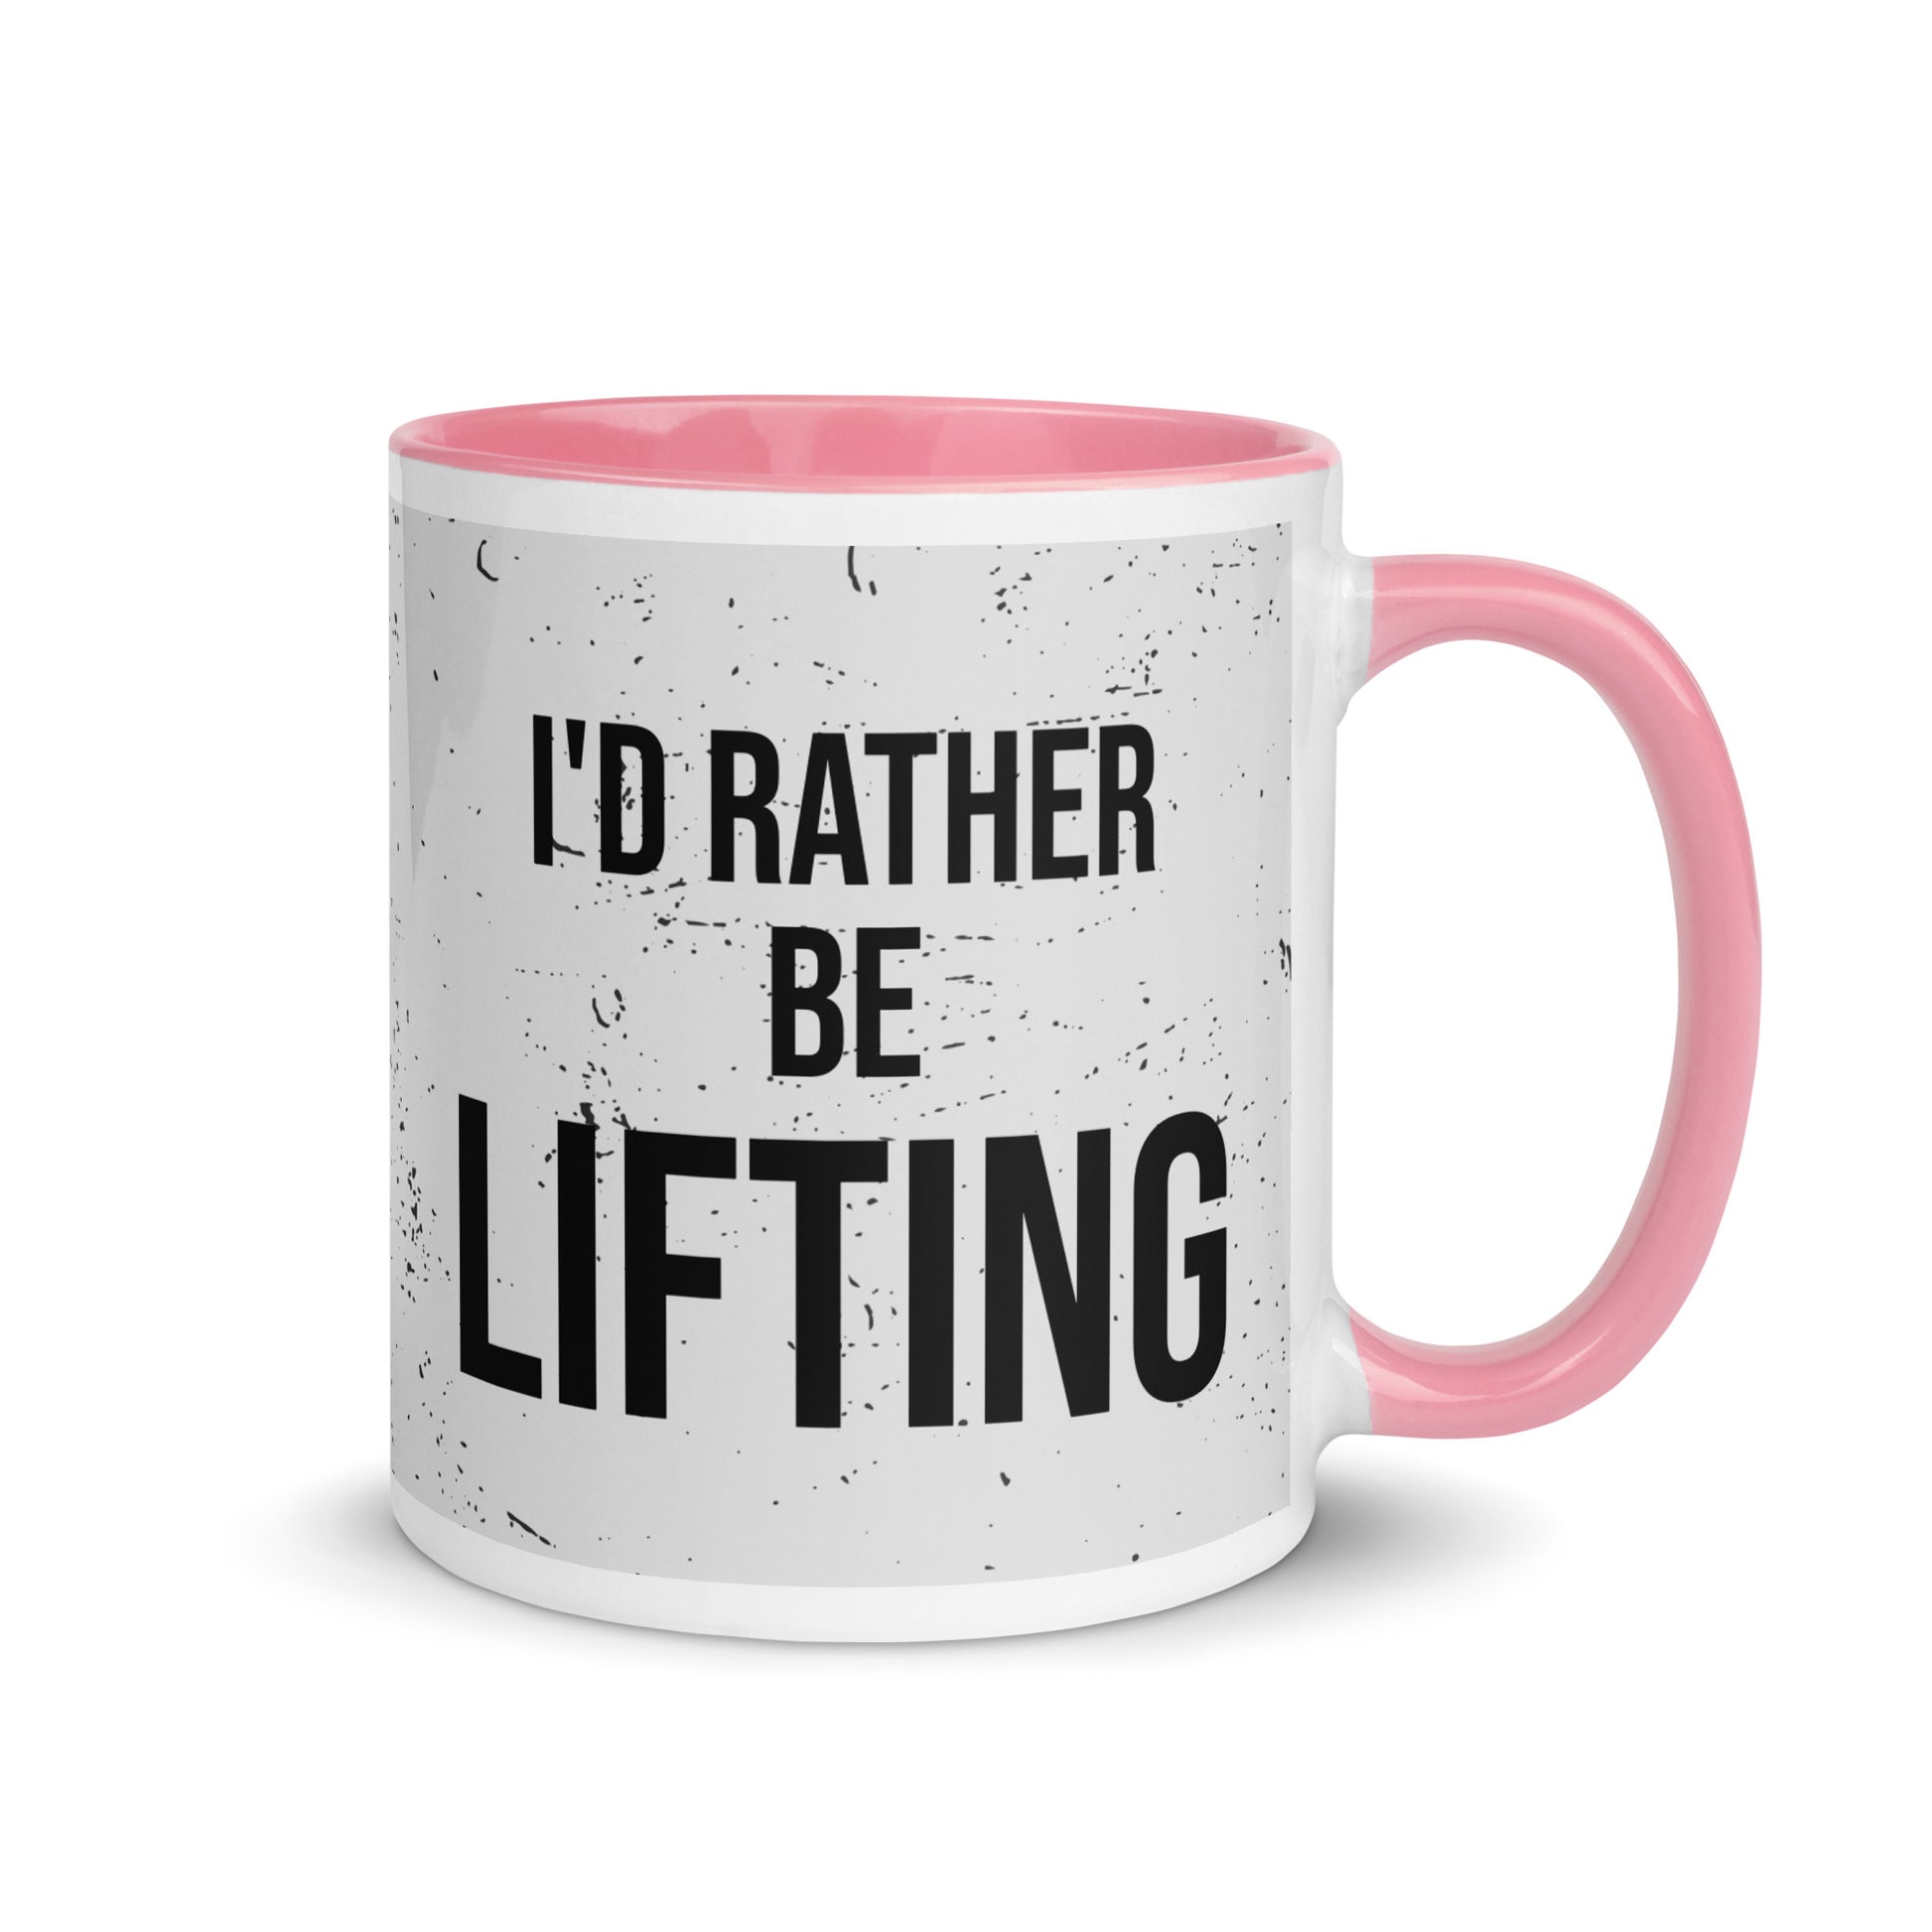 Pink handled mug with I'd rather be lifting written on it, across a grey splatter background. A gift for someone who loves the gym.